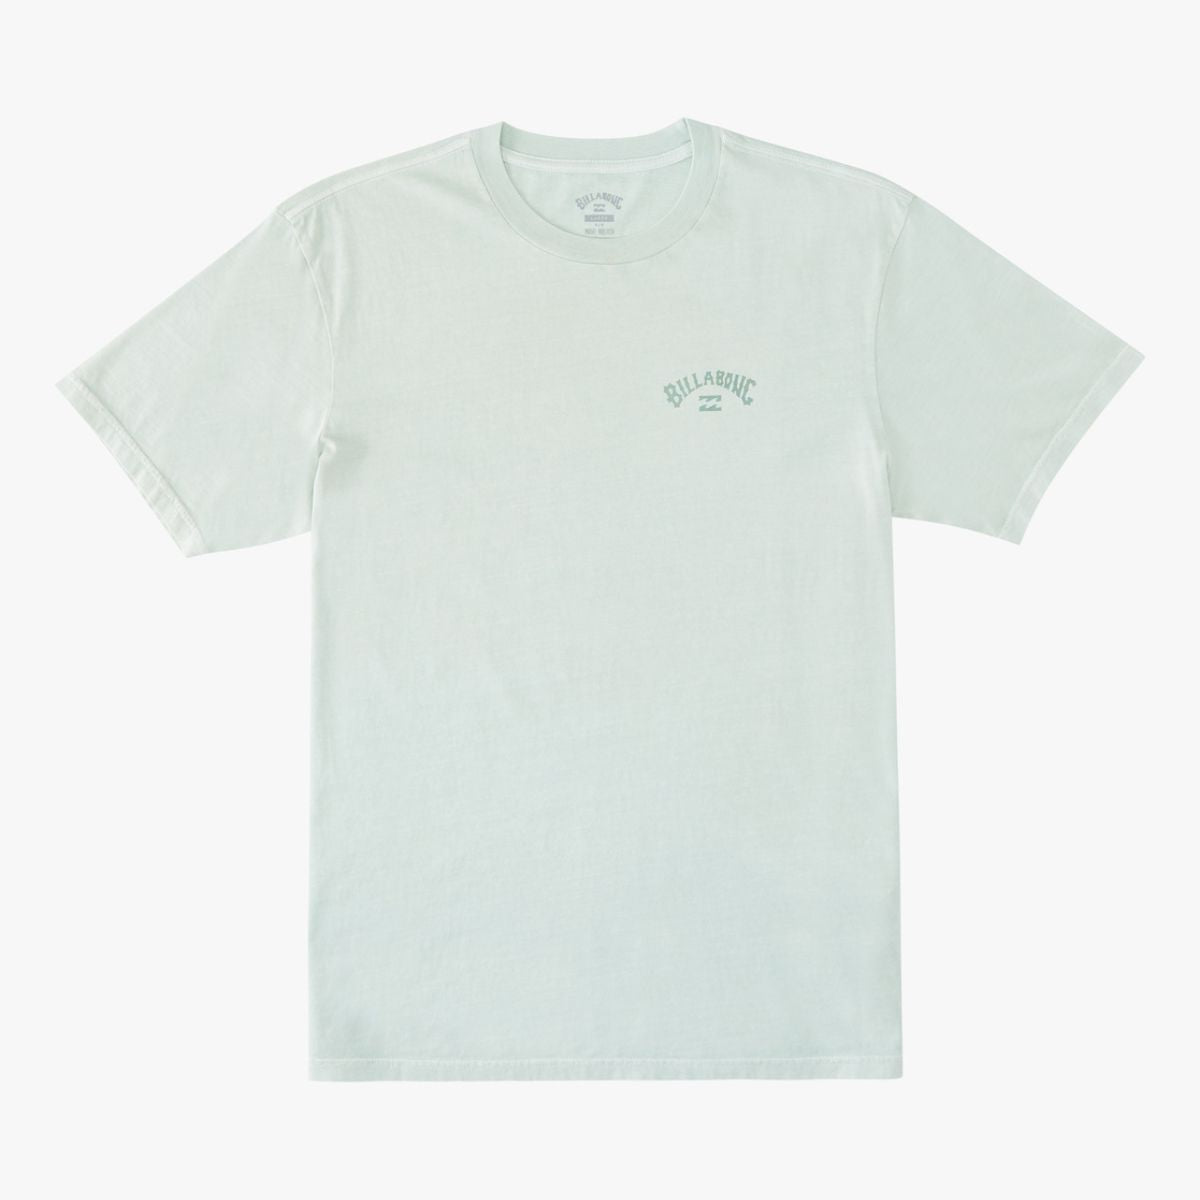 Billabong Arch Wave Washed Tee in Seaglass - BoardCo